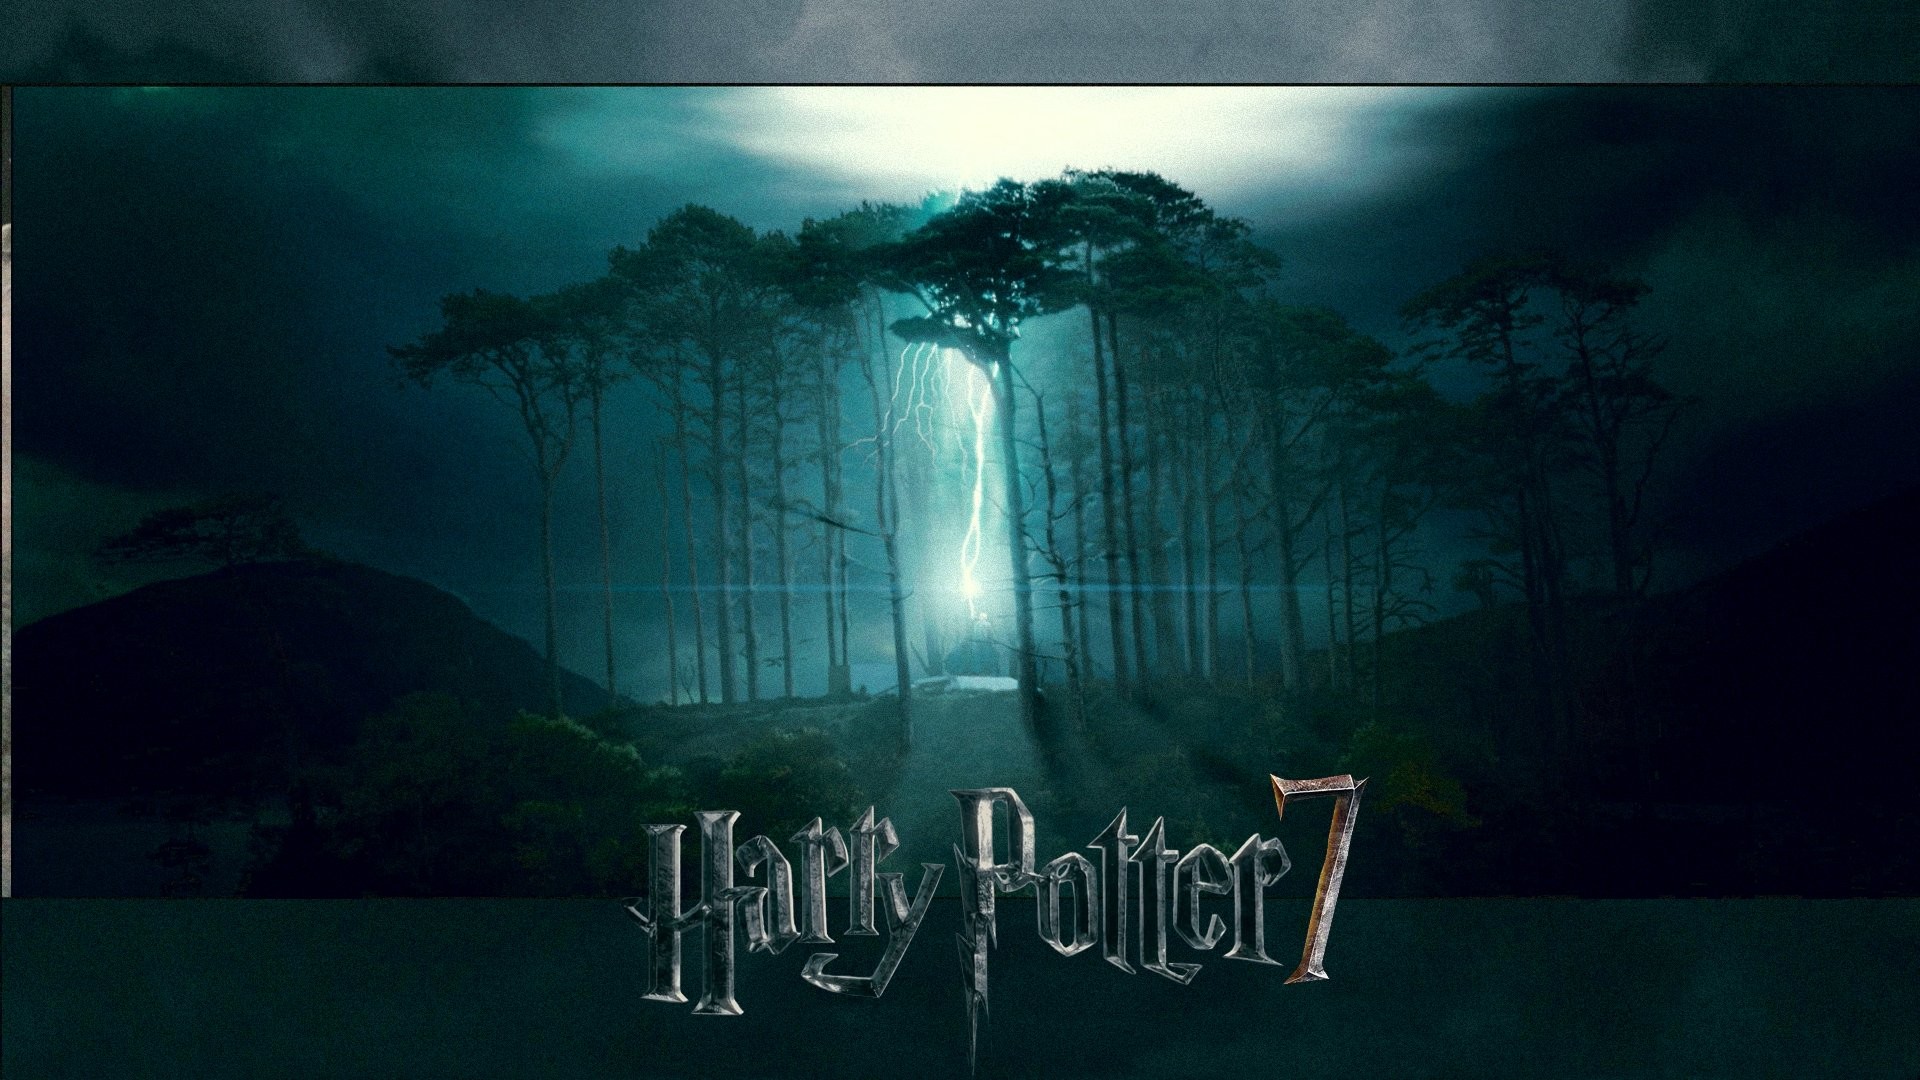 1920x1080 Harry Potter and the Deathly Hallows wallpaper Movie wallpapers 500Ã500  Deathly Hallows Wallpapers (